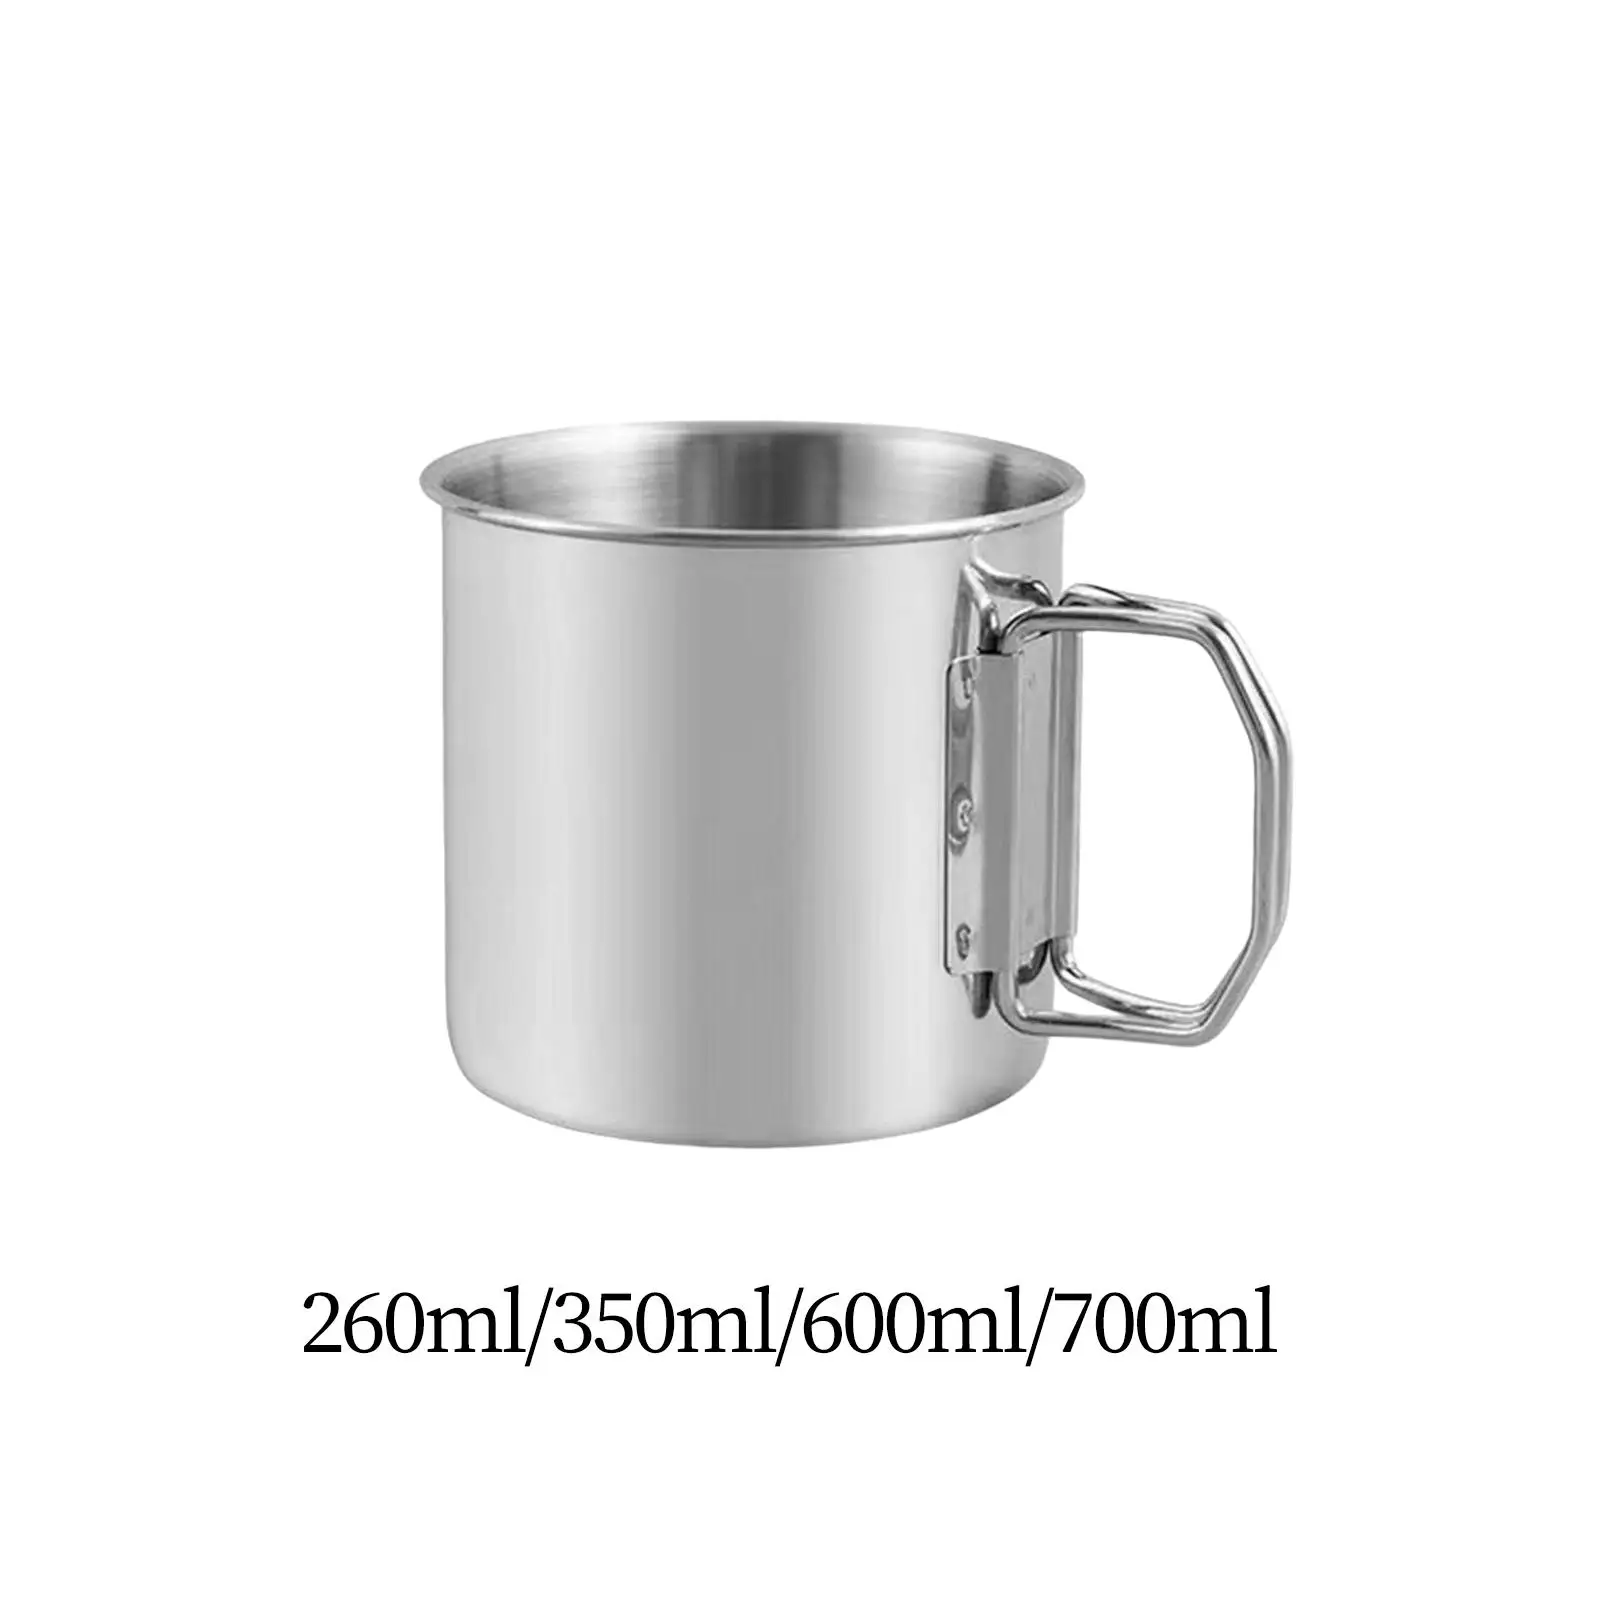 Camping Cup Tea Water Cup Coffee Mug Lightweight with Foldable Handles for Touring Trips Cooking Hiking Outdoor Backpacking